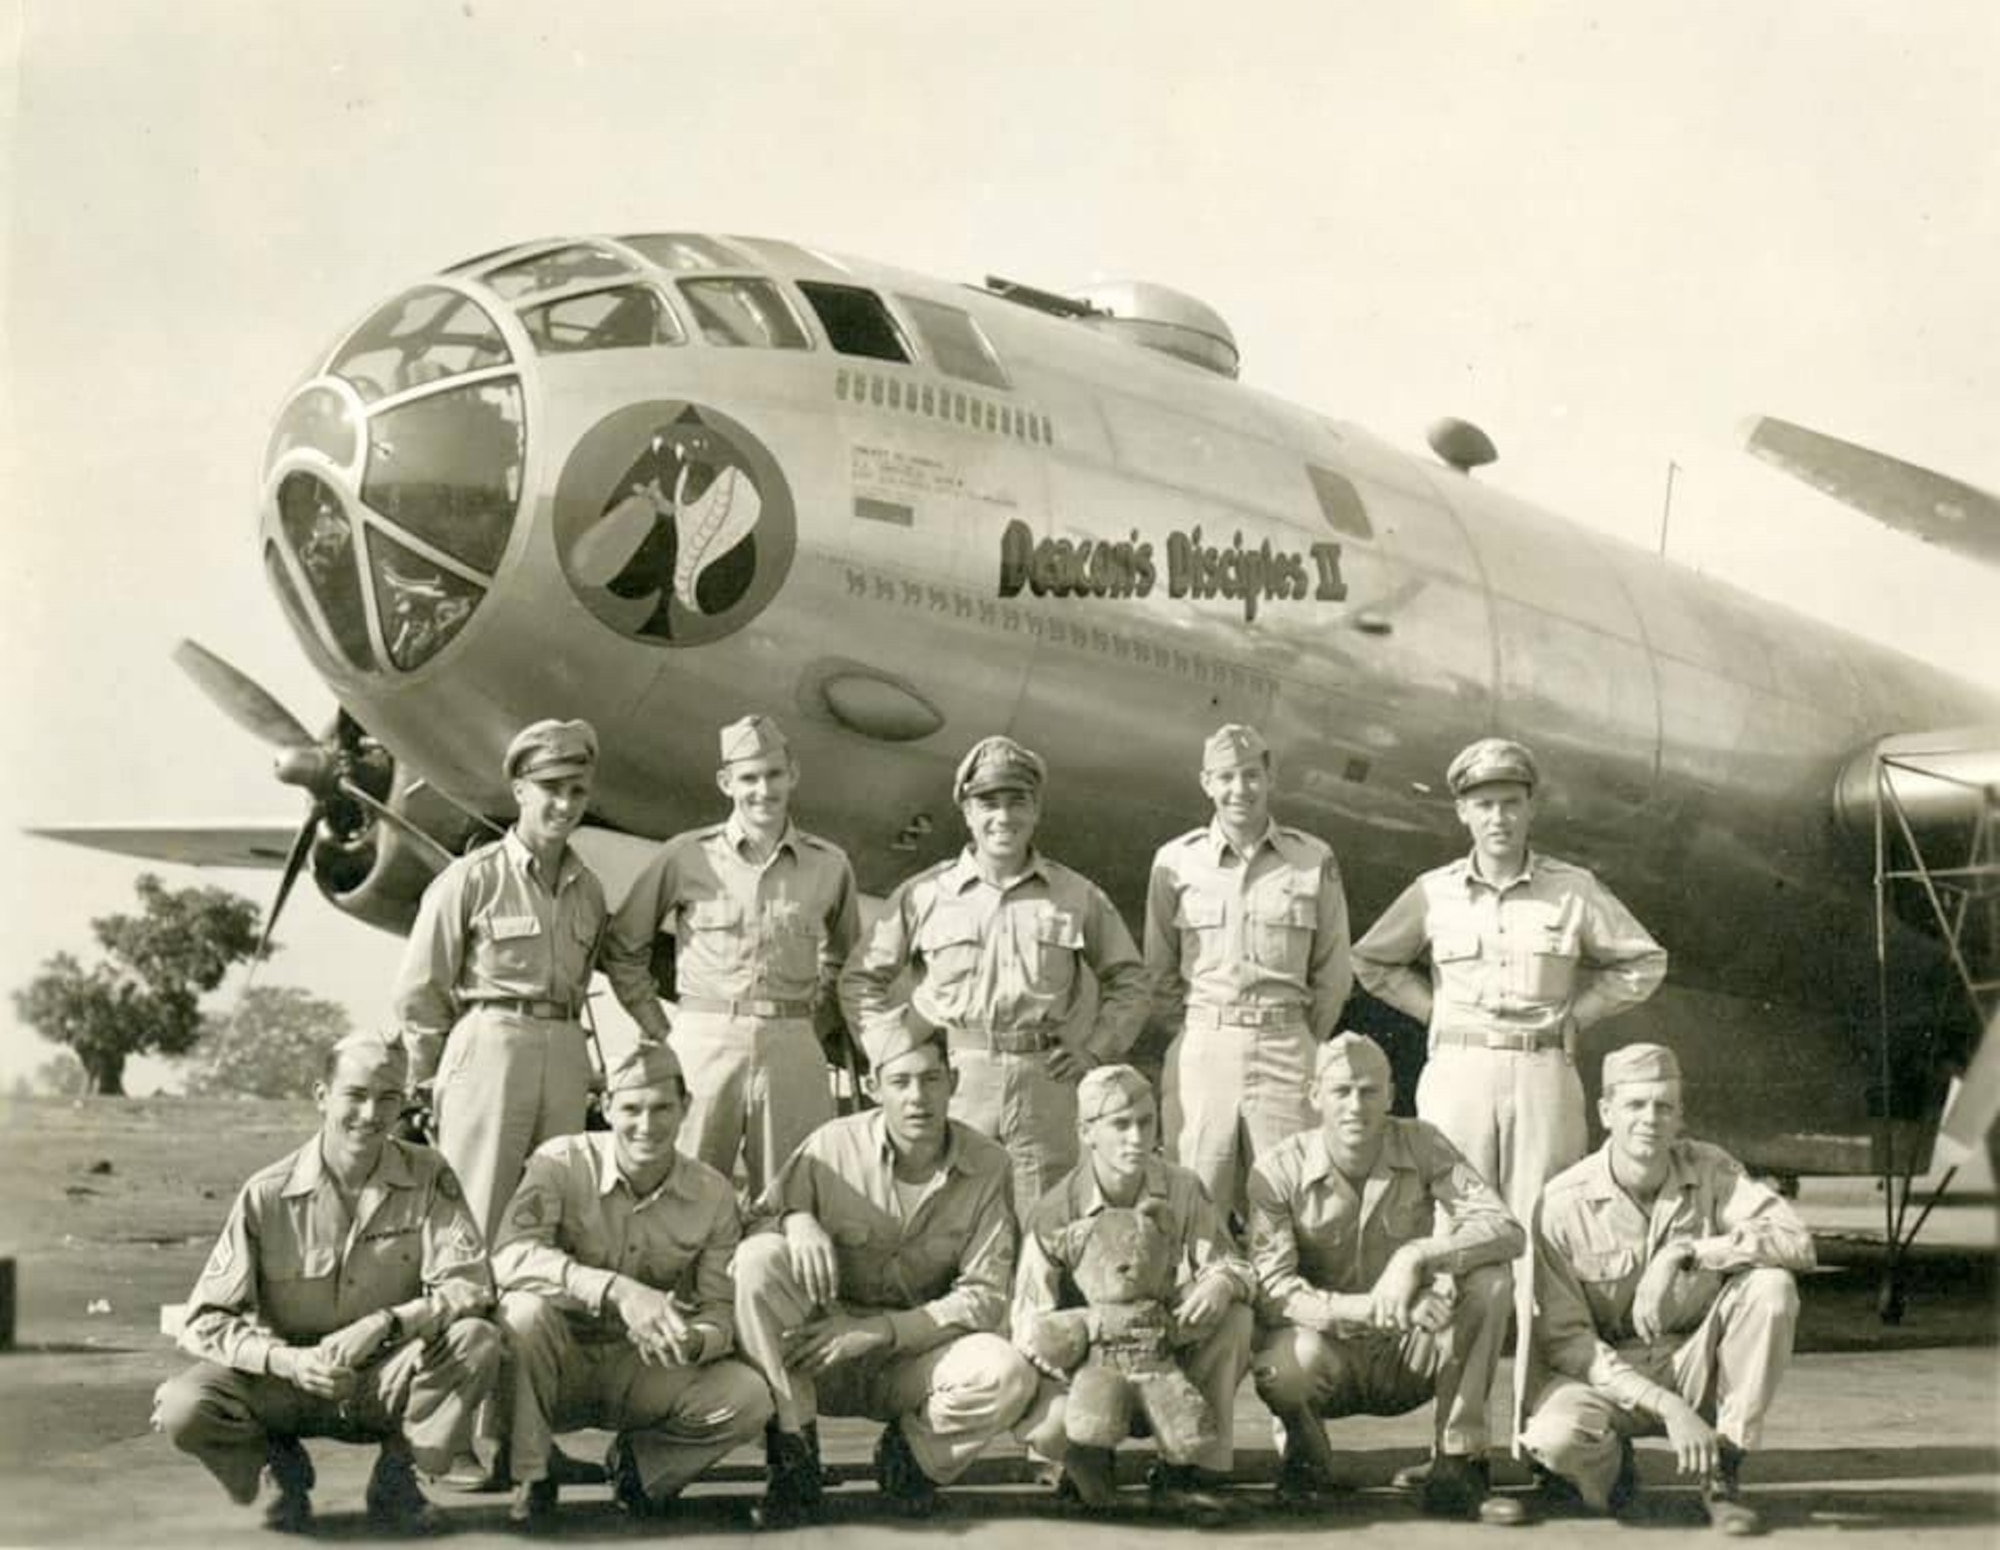 Group photo of Airmen standing in front of an aircraft.